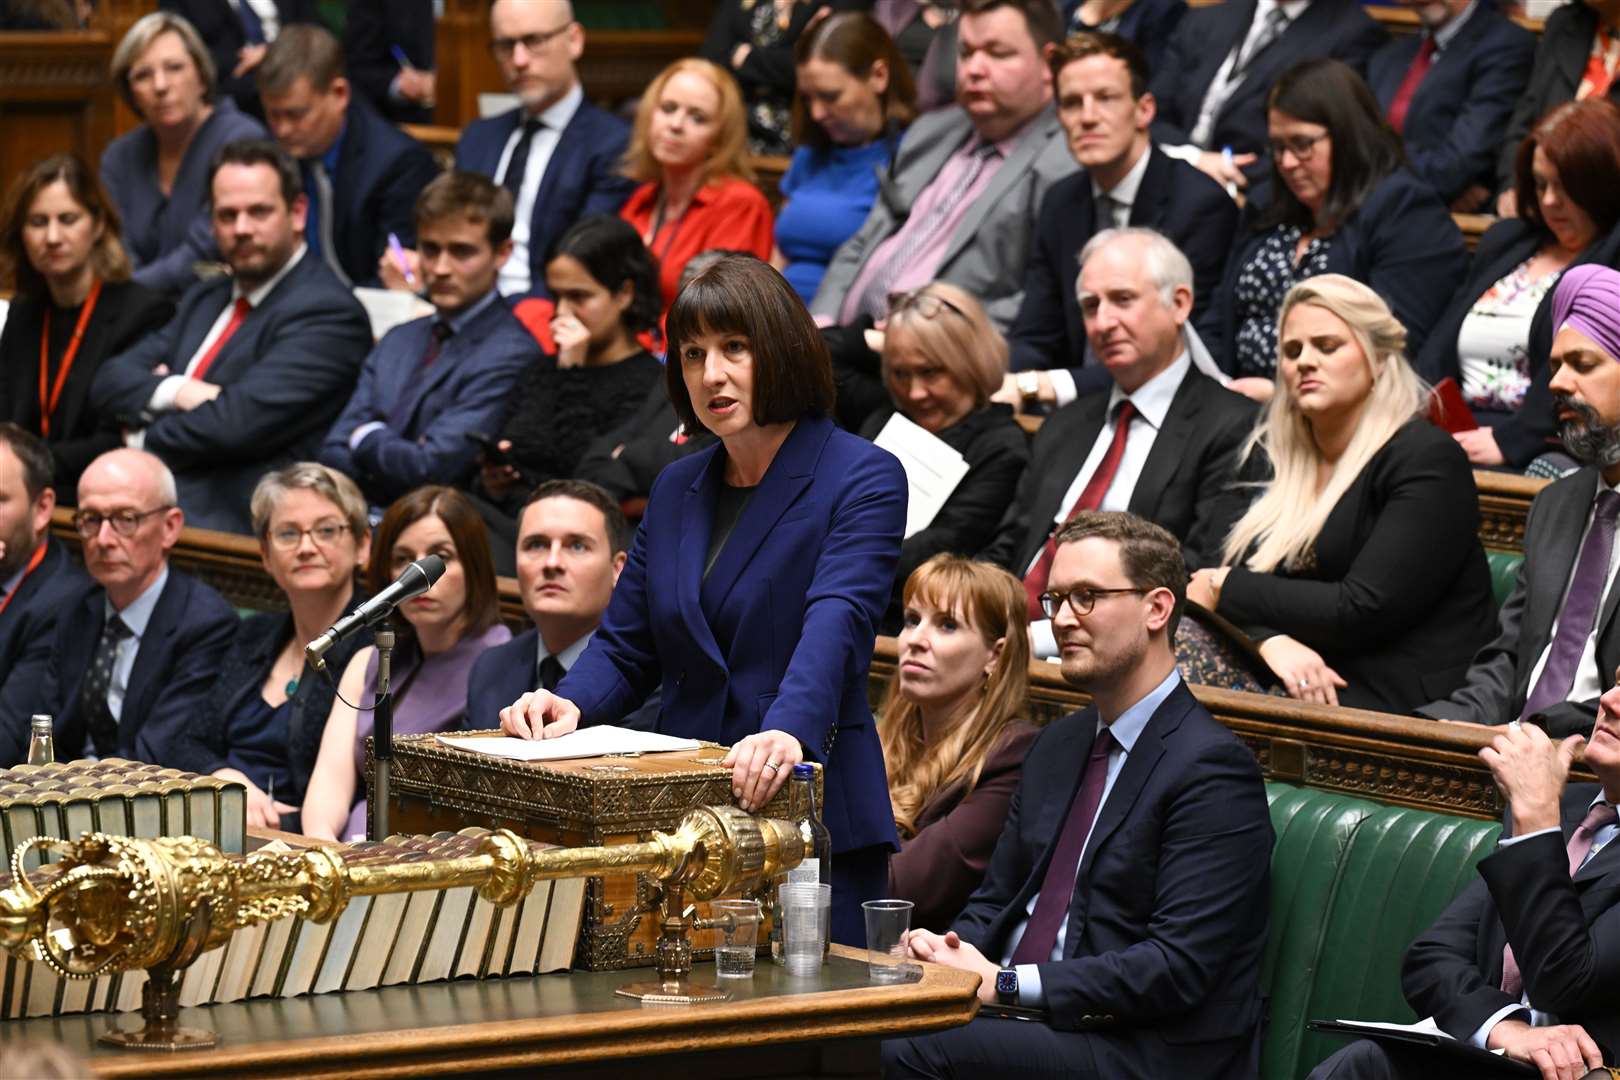 Shadow chancellor Rachel Reeves will face questions on whether Labour would keep Jeremy Hunt’s tax cuts or reverse them to fund more public spending (UK Parliament/Jessica Taylor/PA)